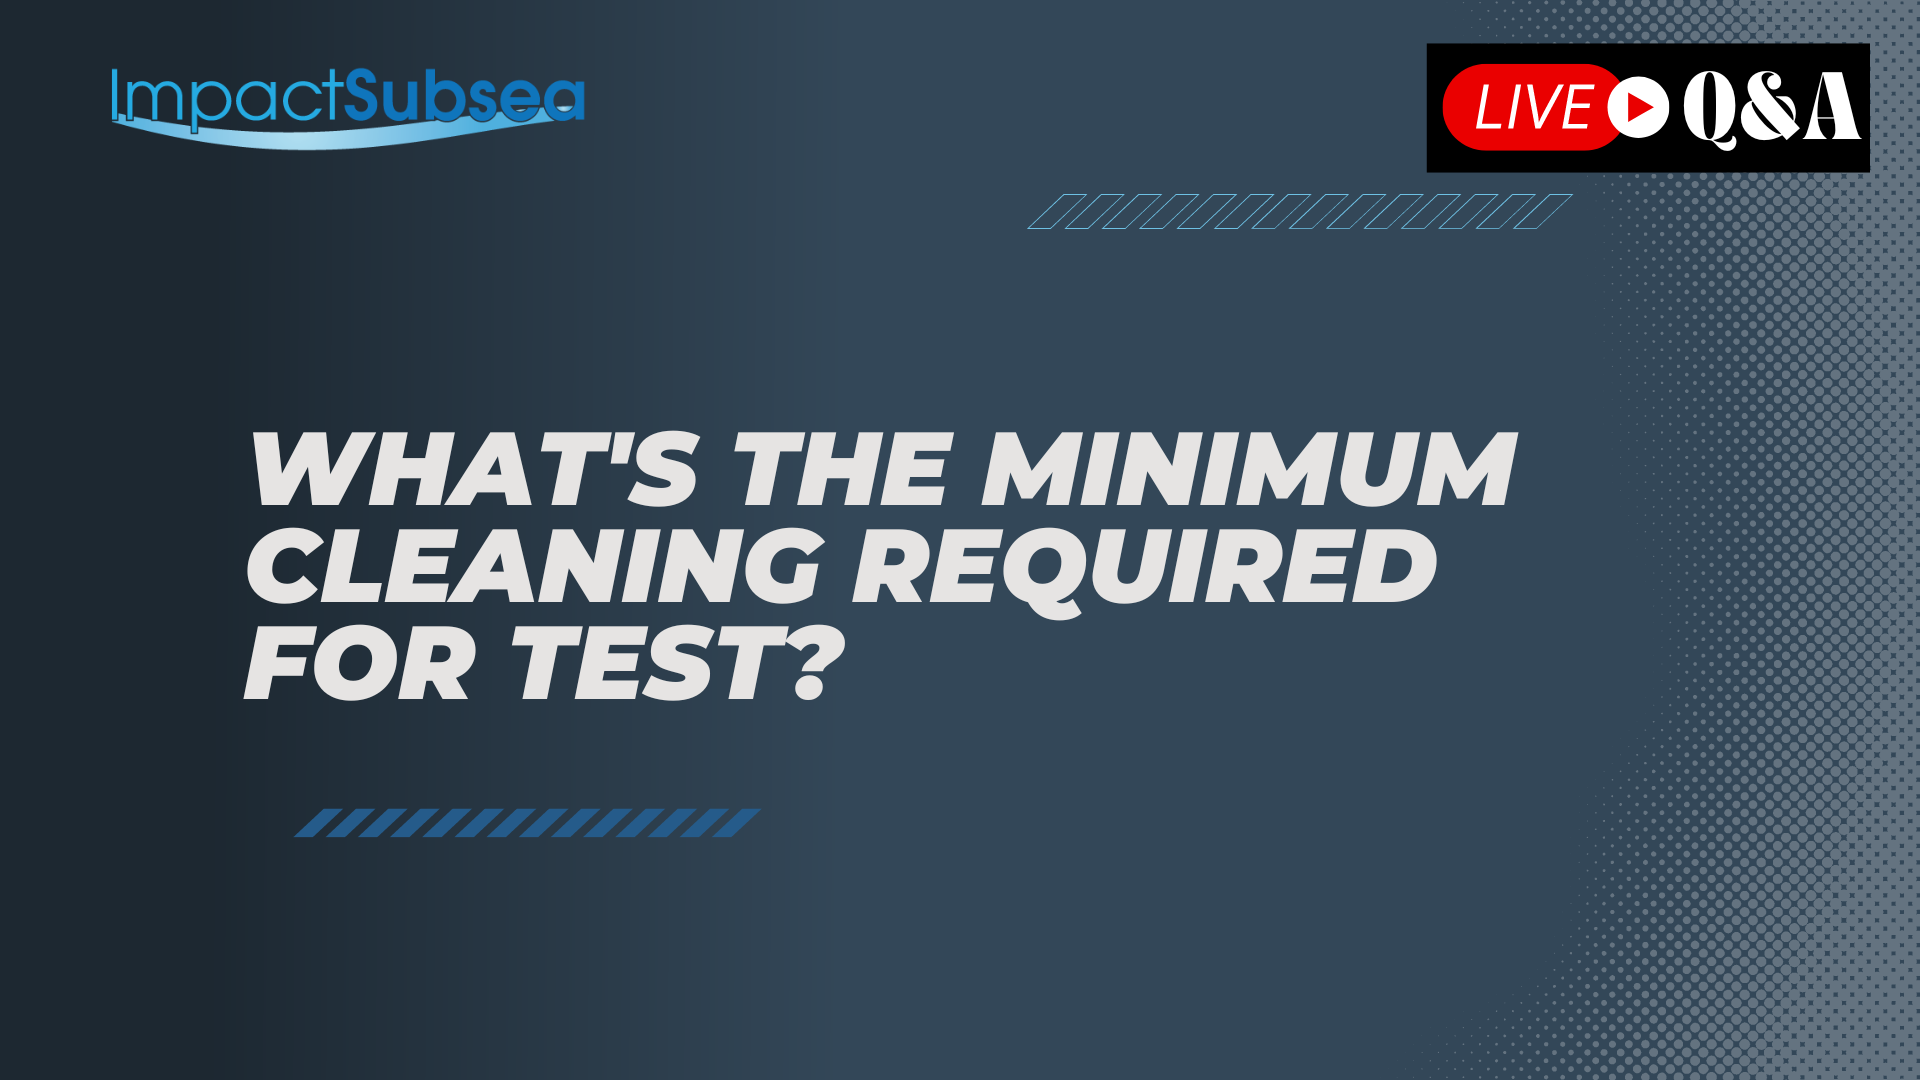 What's the minimum cleaning required for test?